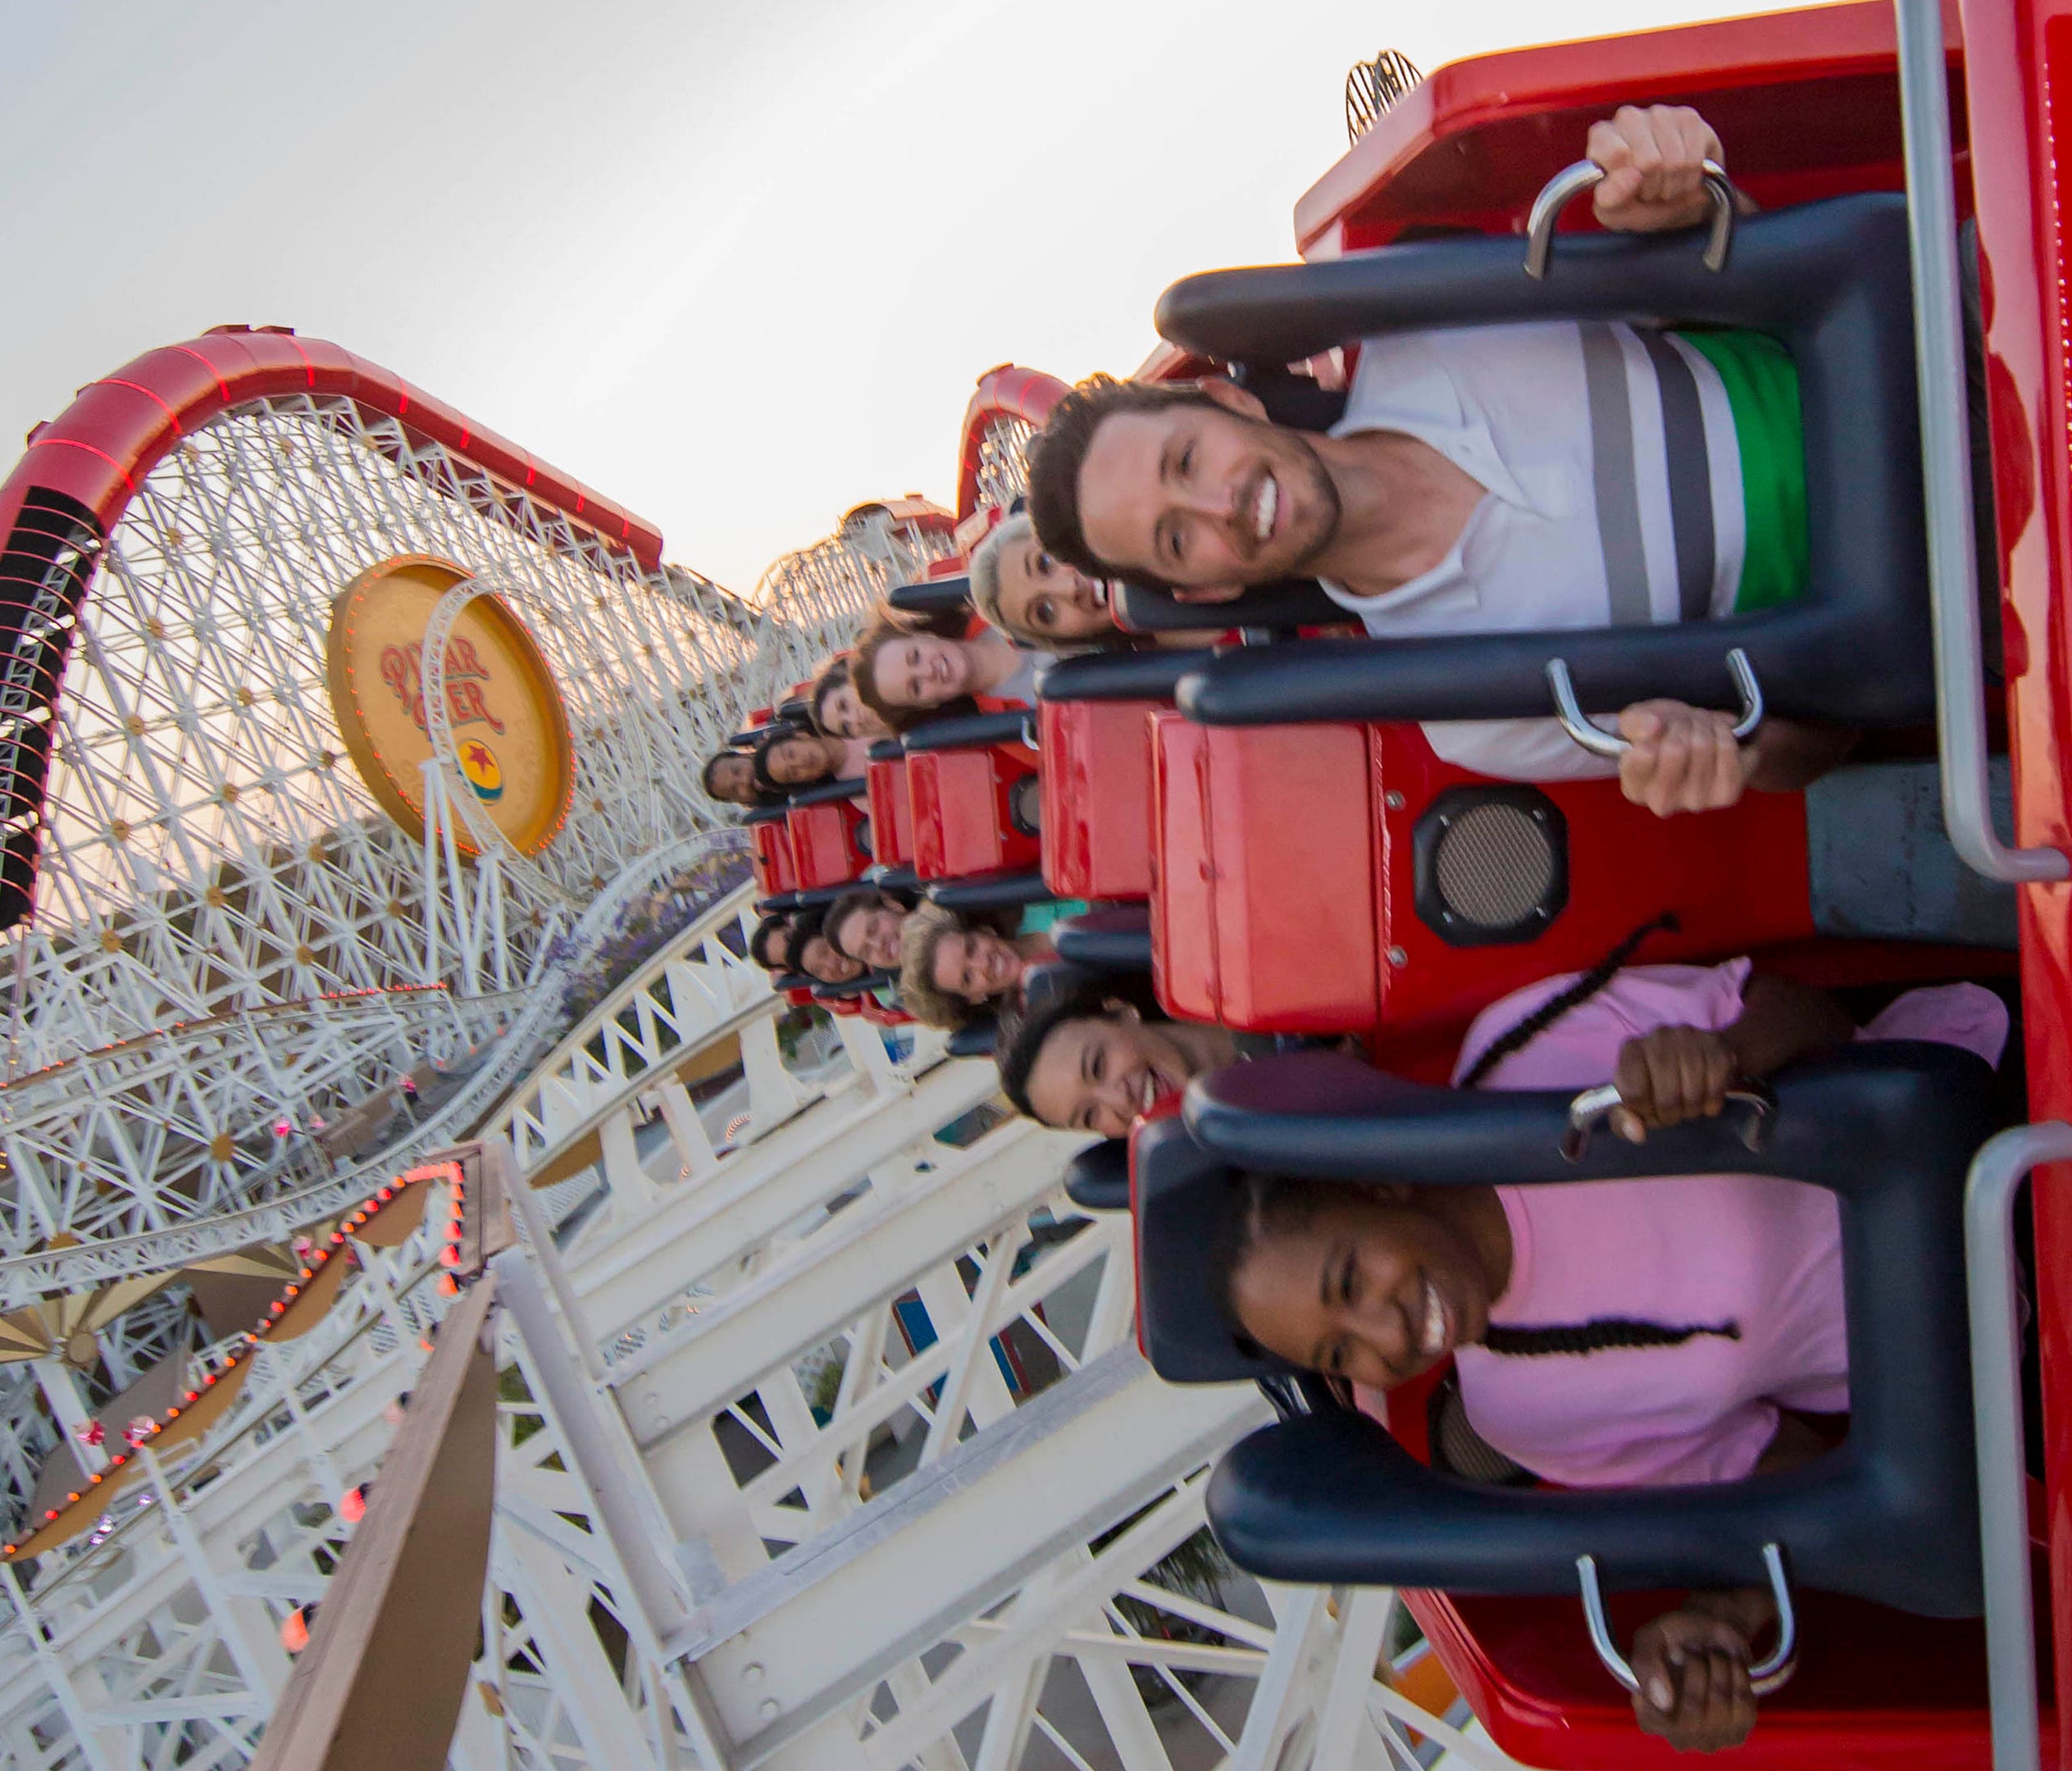 INCREDICOASTER AT PIXAR PIER (ANAHEIM, Calif.) – The thrilling Incredicoaster opens June 23, 2018 at Disney California Adventure Park, bringing guests the first ride-through attraction in the world to feature characters from Disney•Pixar's 